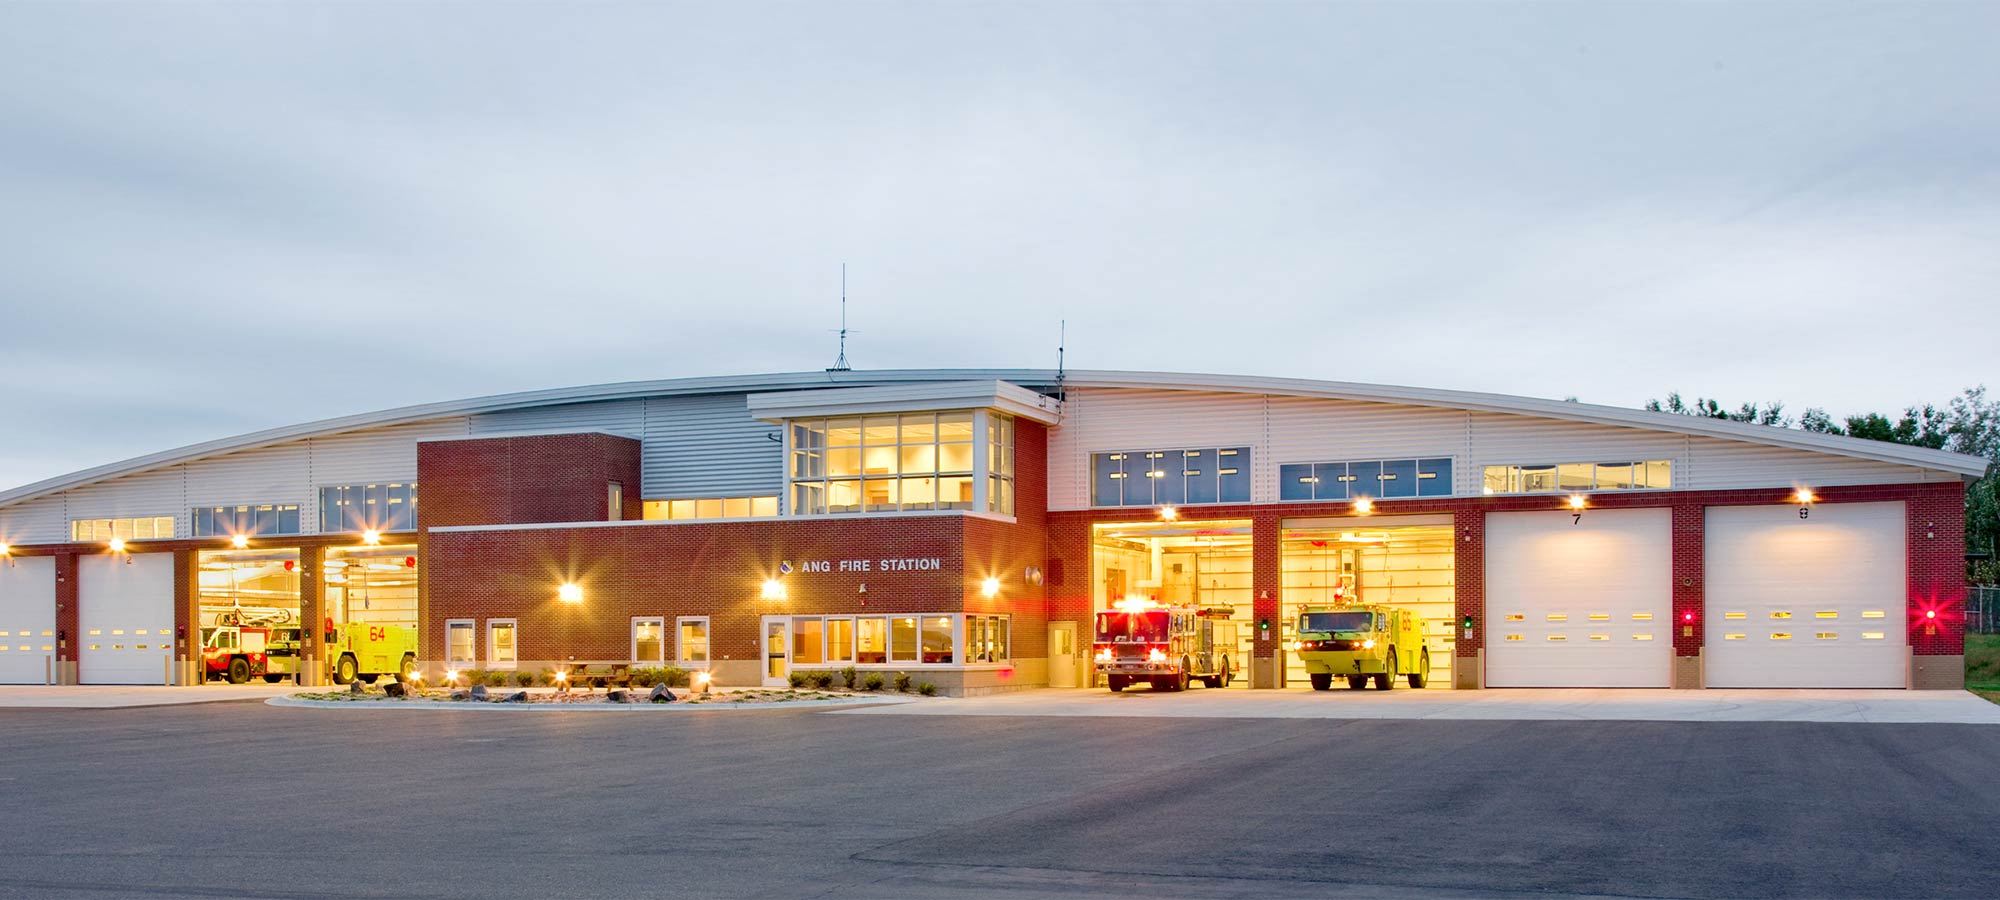 Fire station exterior